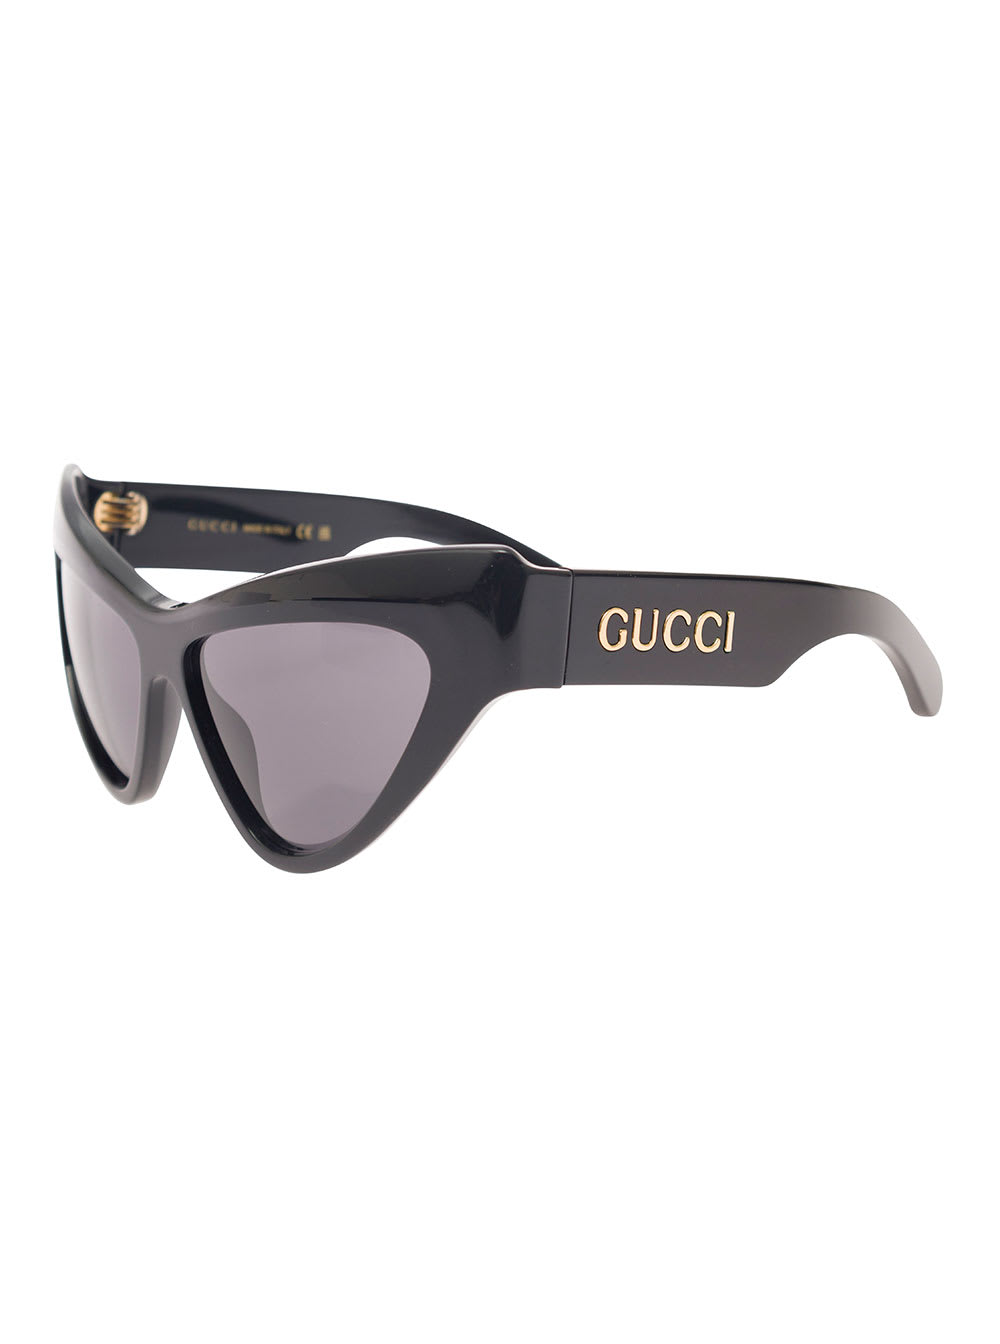 GUCCI GG1294S BLACK CAT-EYE SUNGLASSES WITH LOGO LETTERING IN SHINY ACETATE WOMAN